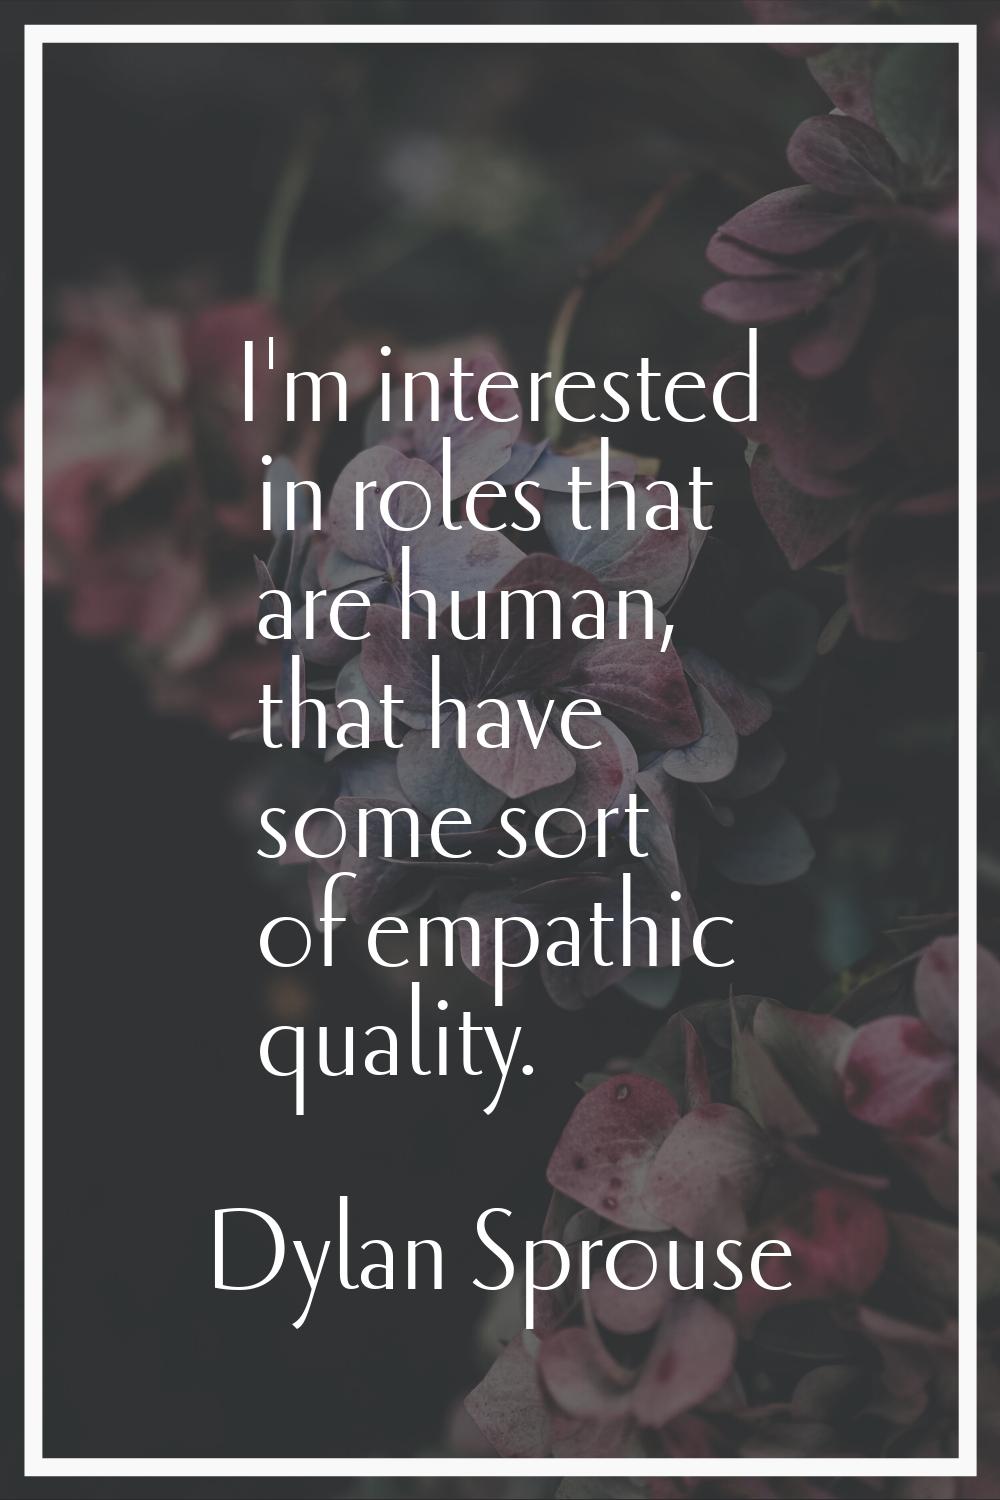 I'm interested in roles that are human, that have some sort of empathic quality.